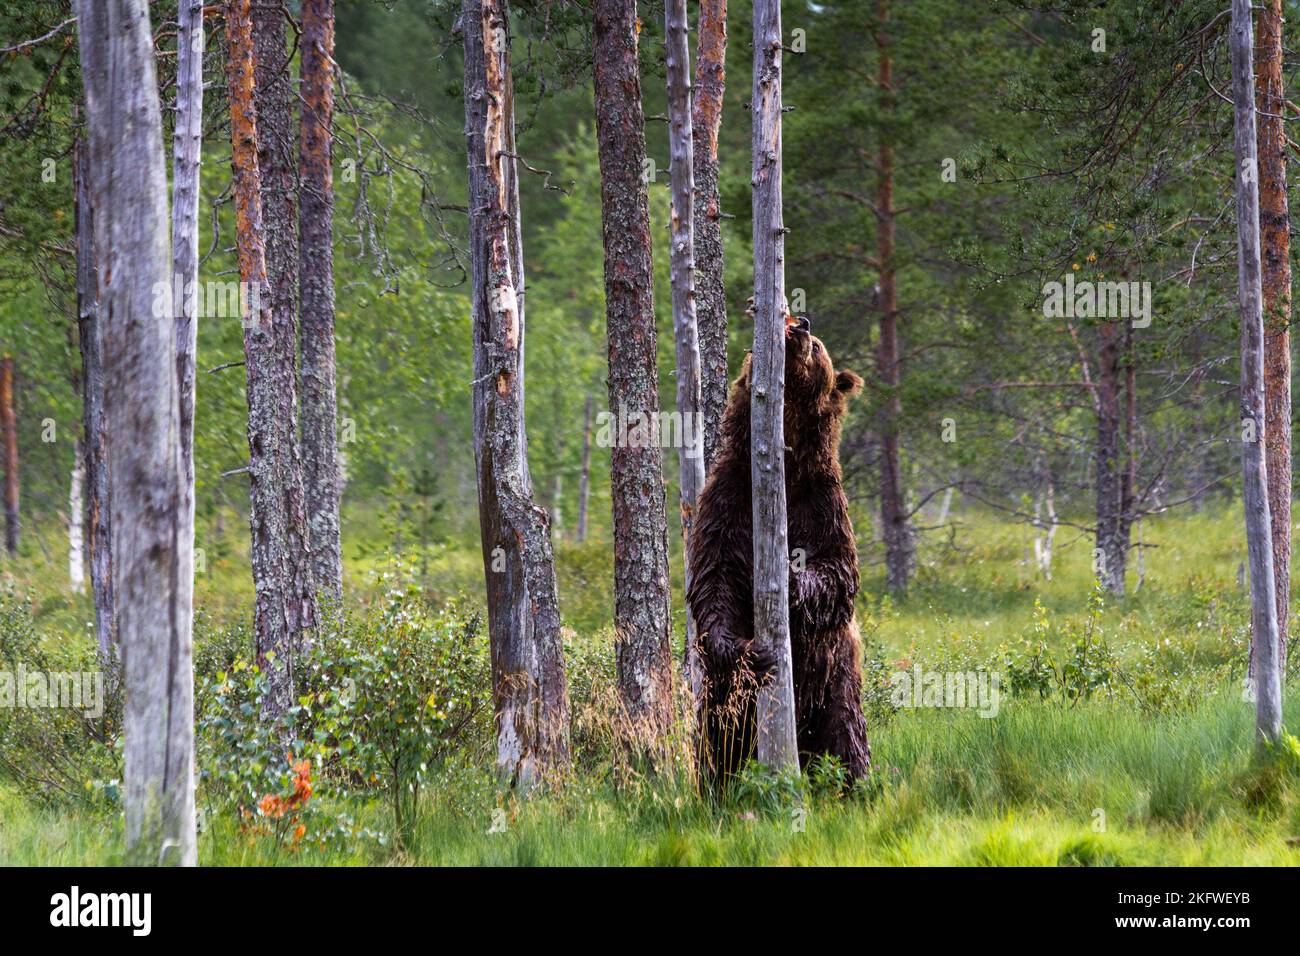 An adult brown bear standing on its feet and holding a tree in search of food Stock Photo